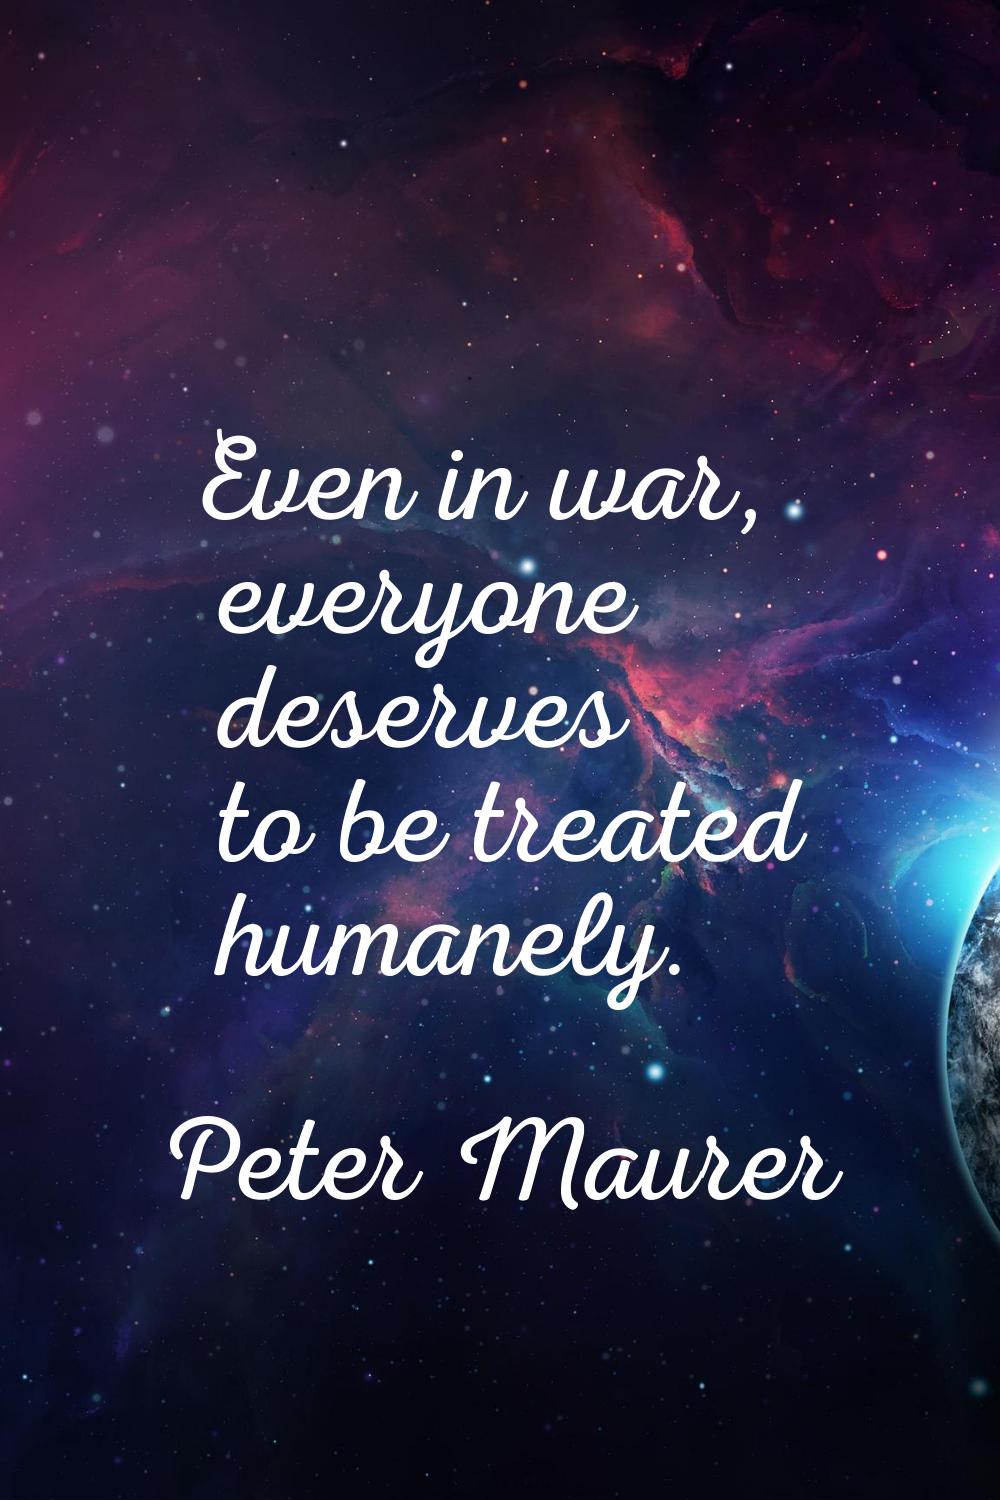 Even in war, everyone deserves to be treated humanely.